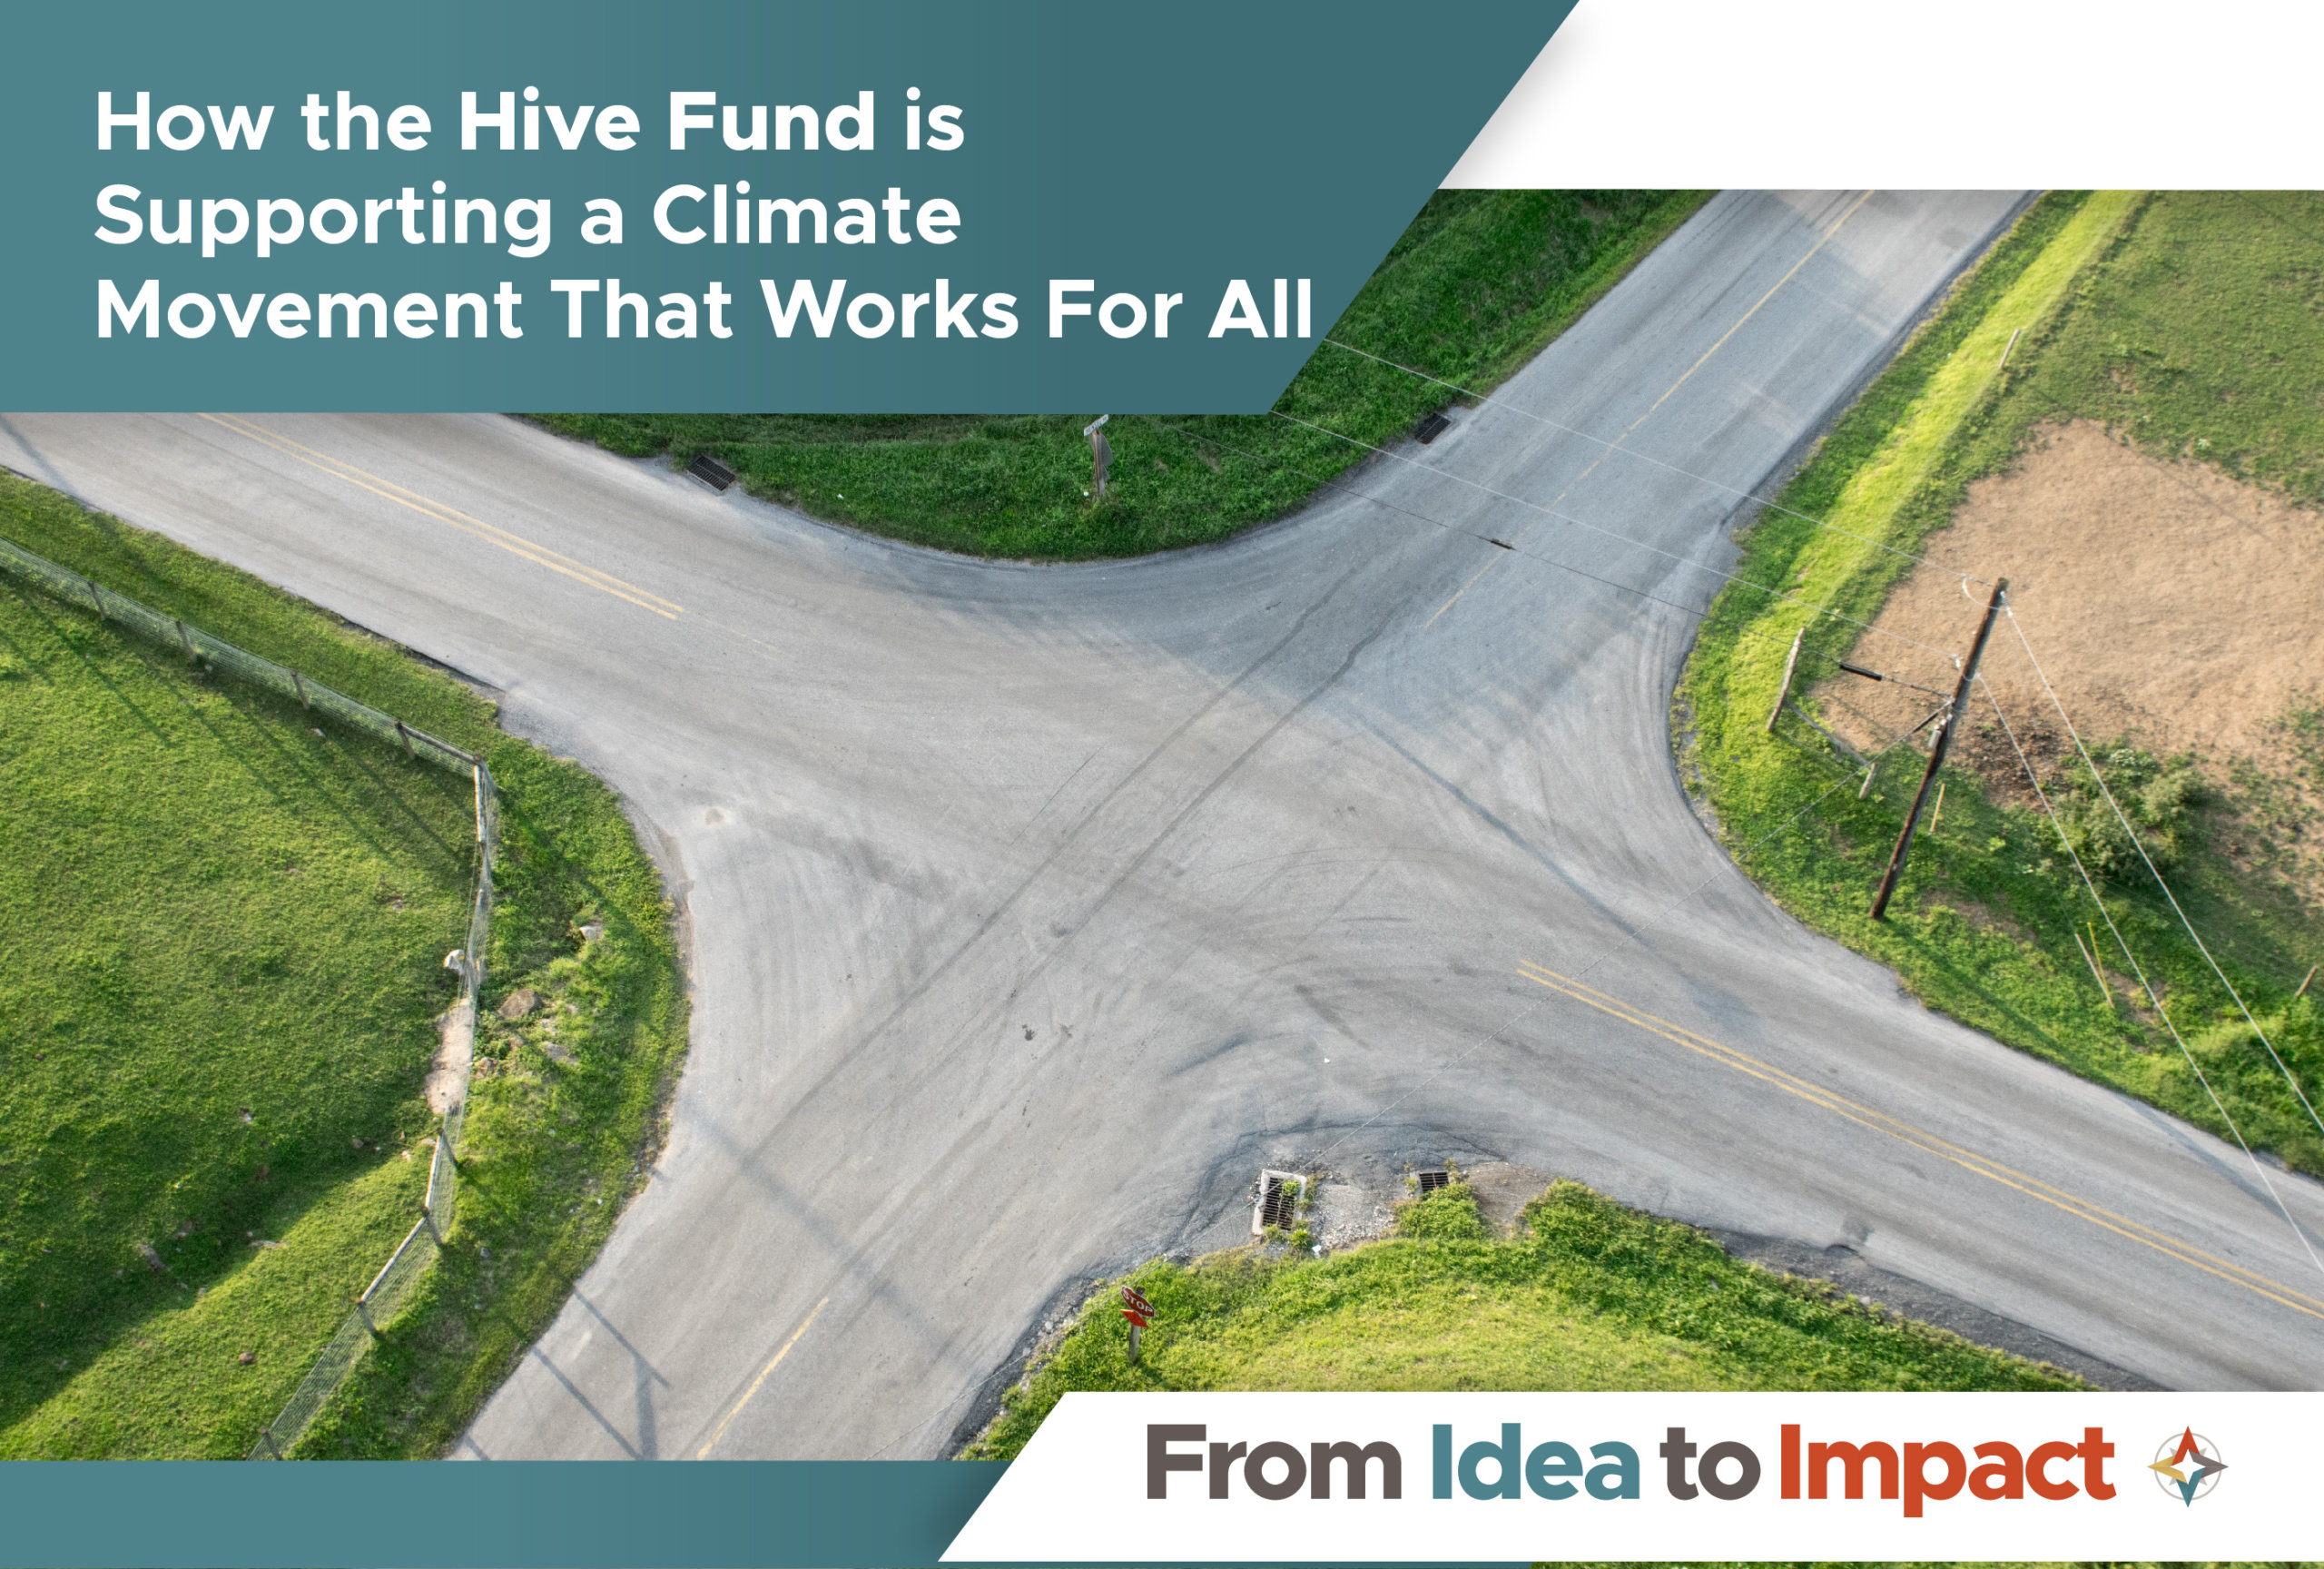 How the Hive Fund is Supporting a Climate Movement That Works For All